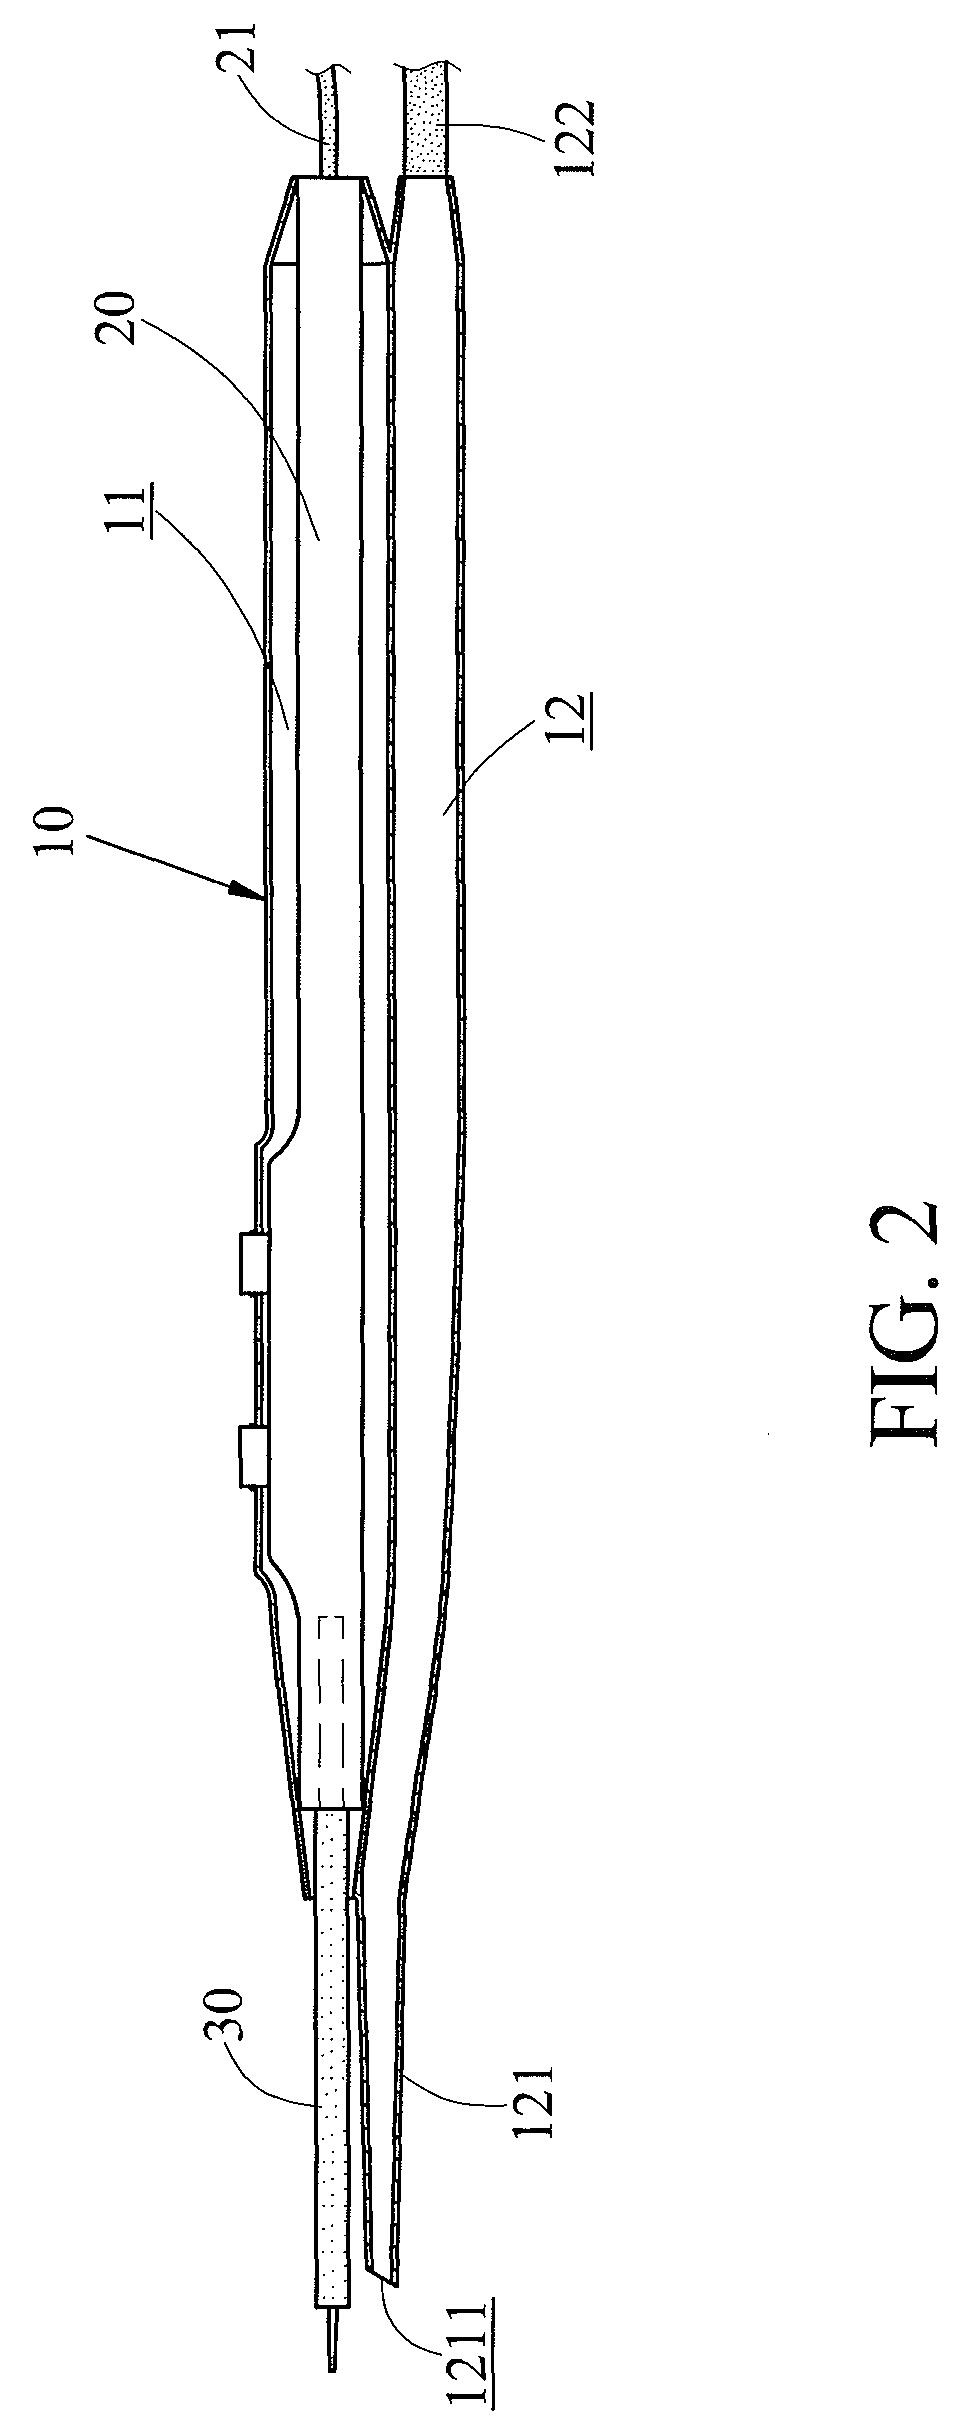 Electrosurgical Pencil with Synchronous Evacuation Function